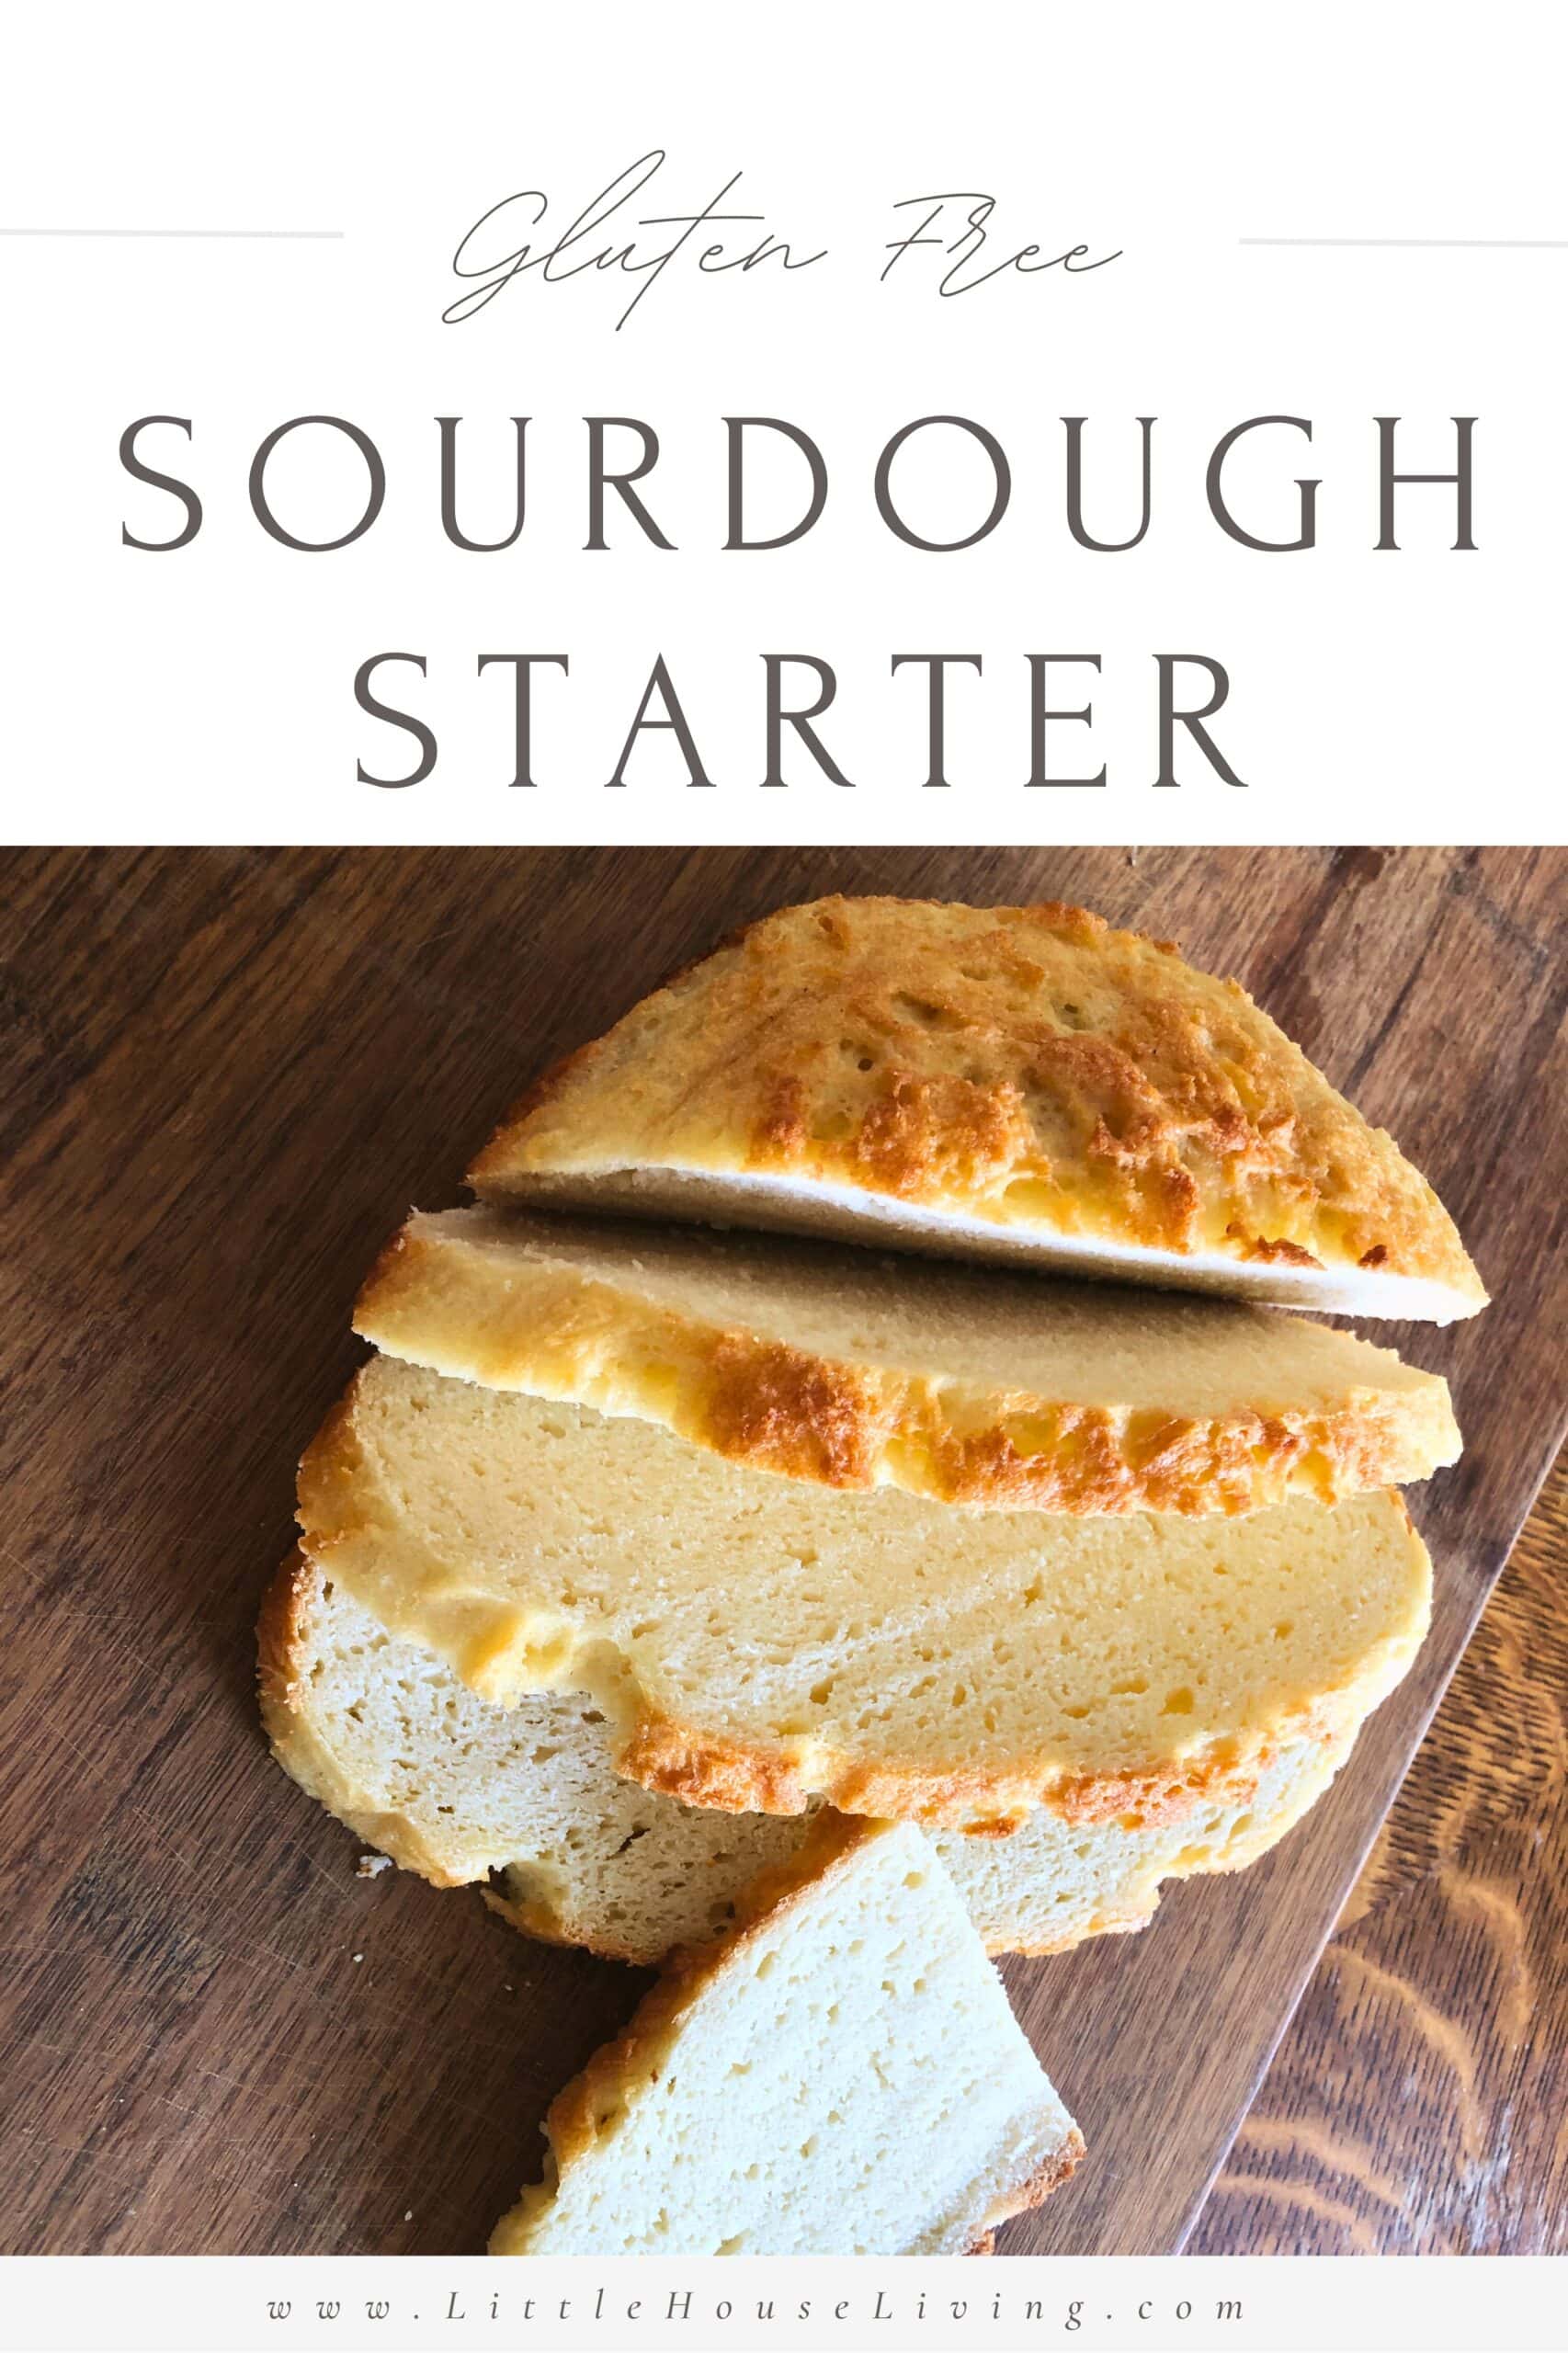 Are you a gluten-free enthusiast who misses the tangy and delicious flavor of sourdough bread? Look no further! In this blog post, our guest will guide you through the process of creating your very own gluten-free sourdough starter.